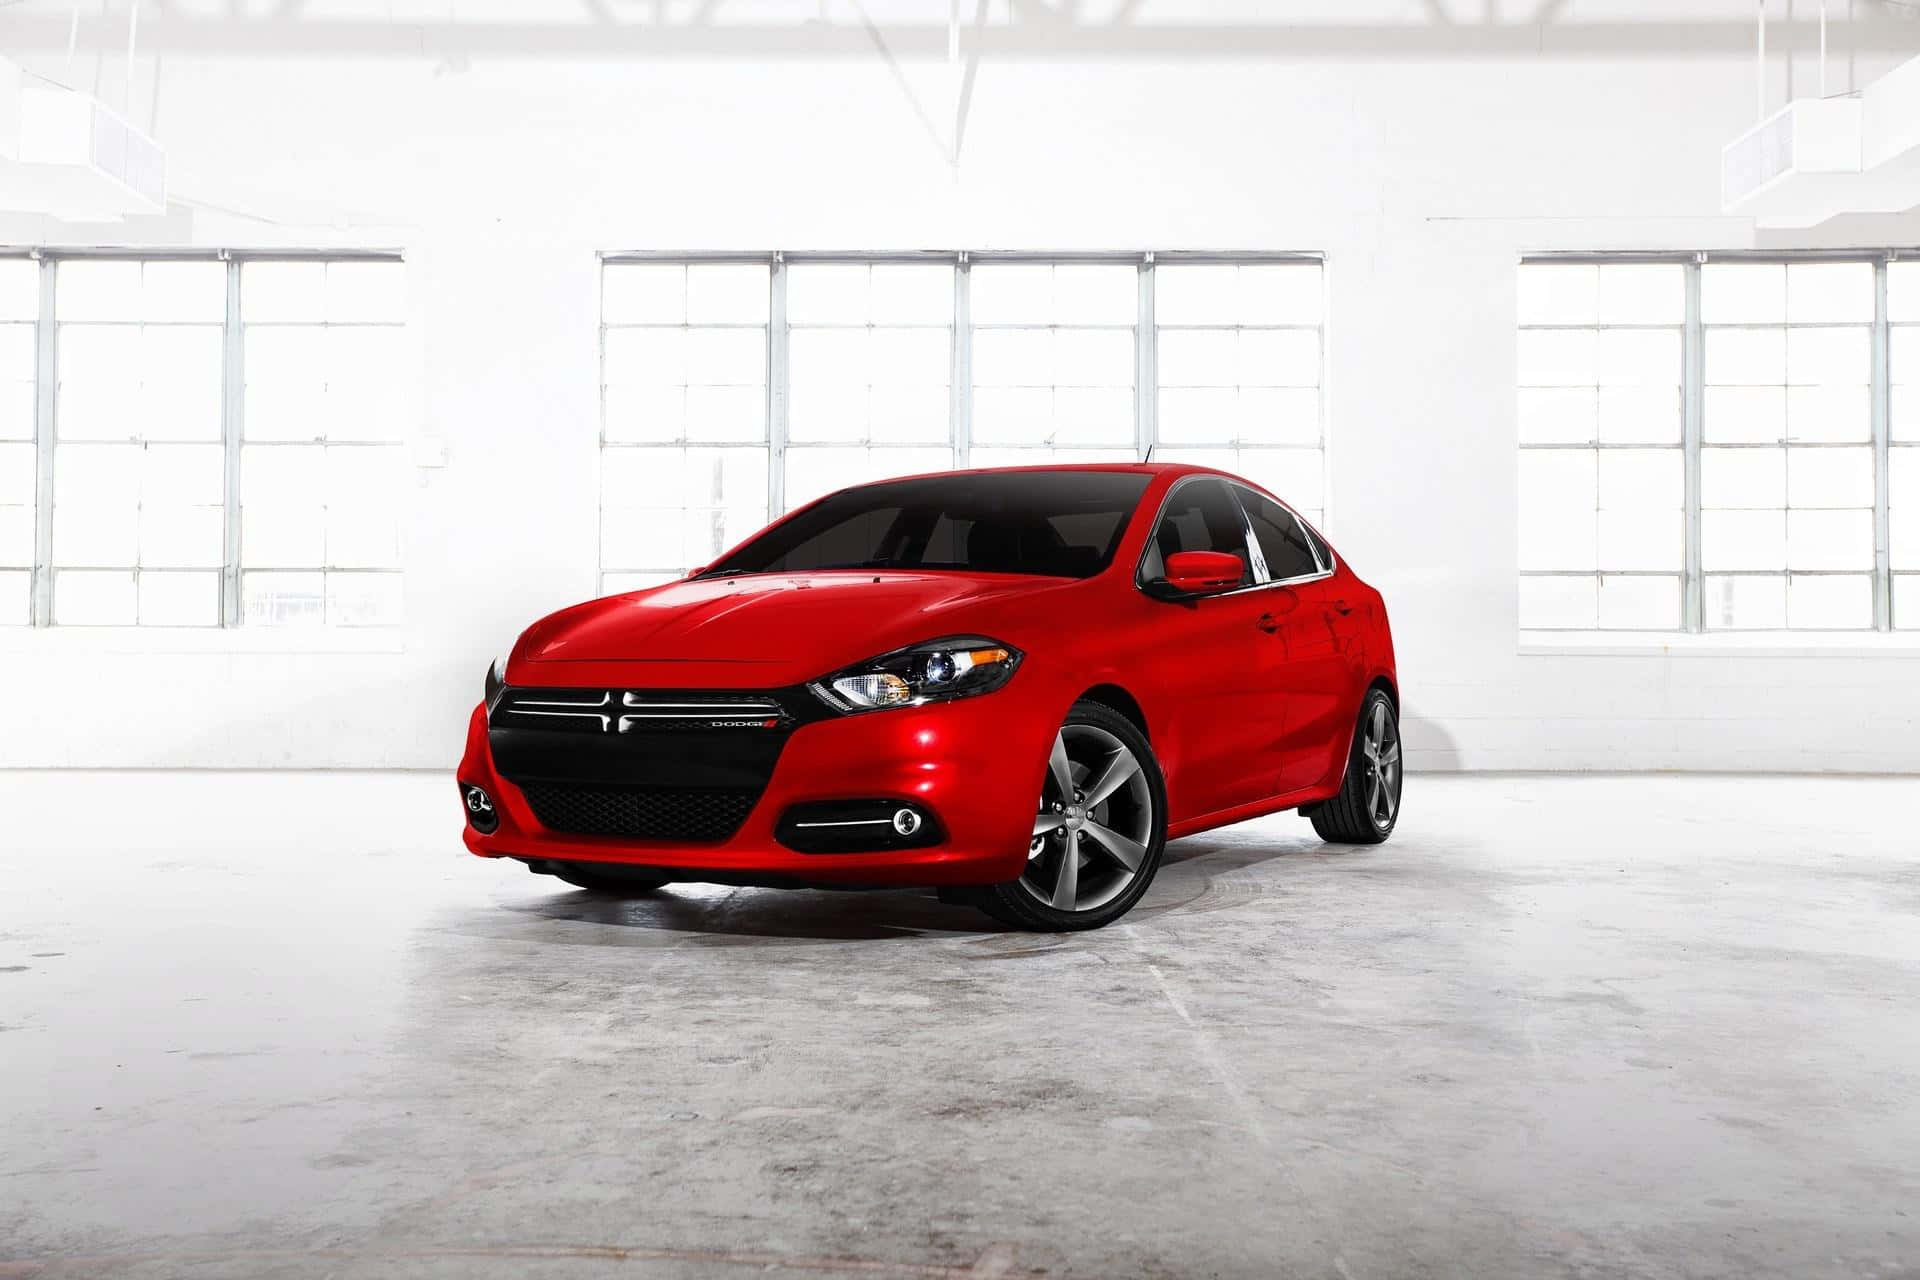 "stylish And Powerful Dodge Dart Ready For A Ride" Wallpaper